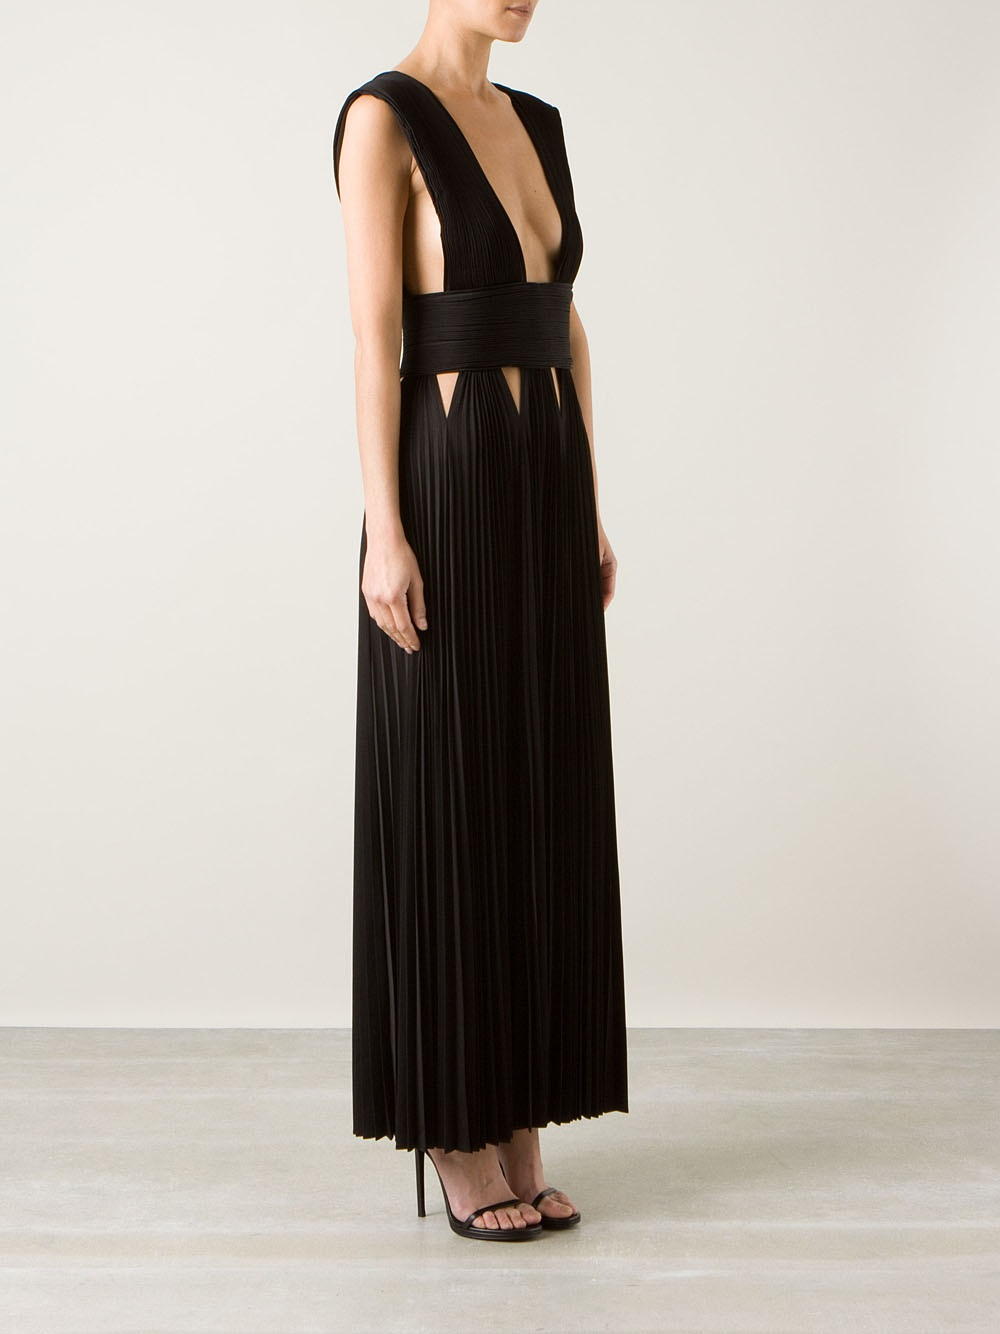 Lyst - Givenchy Pleated Maxi Dress in Black